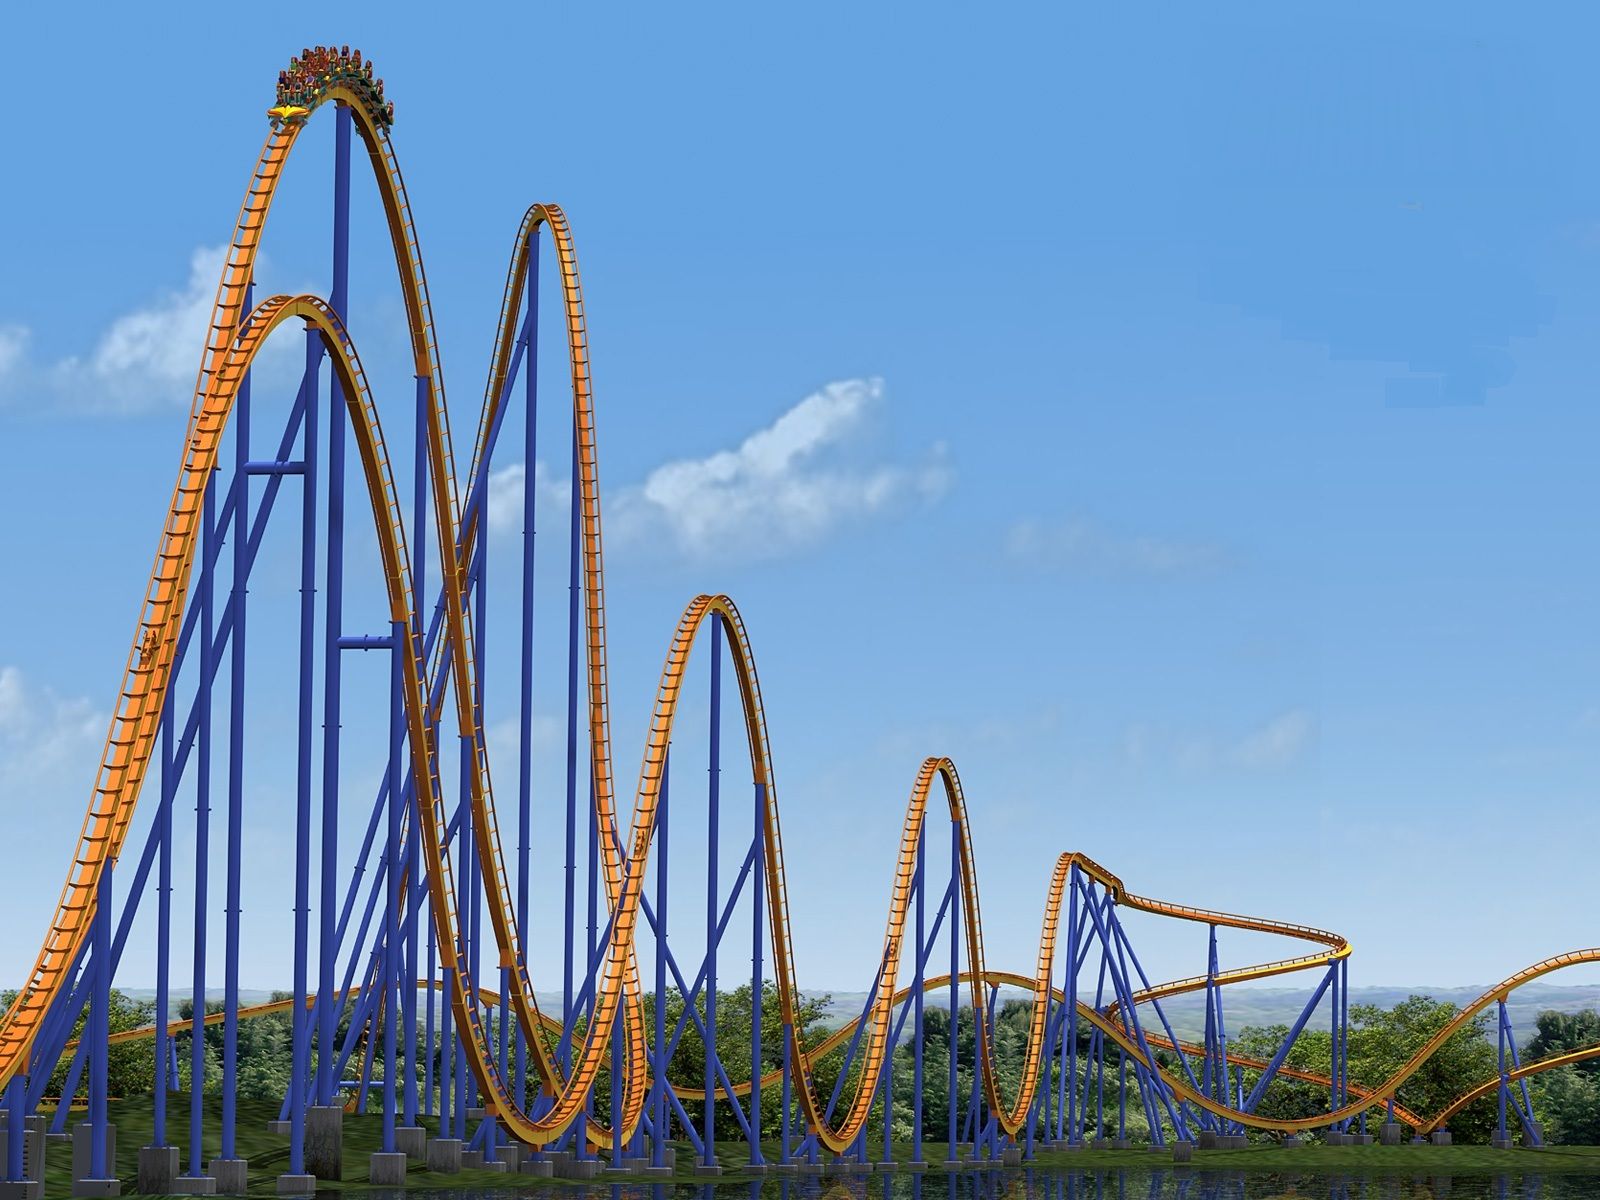 10 of the Tallest Roller Coasters in the World